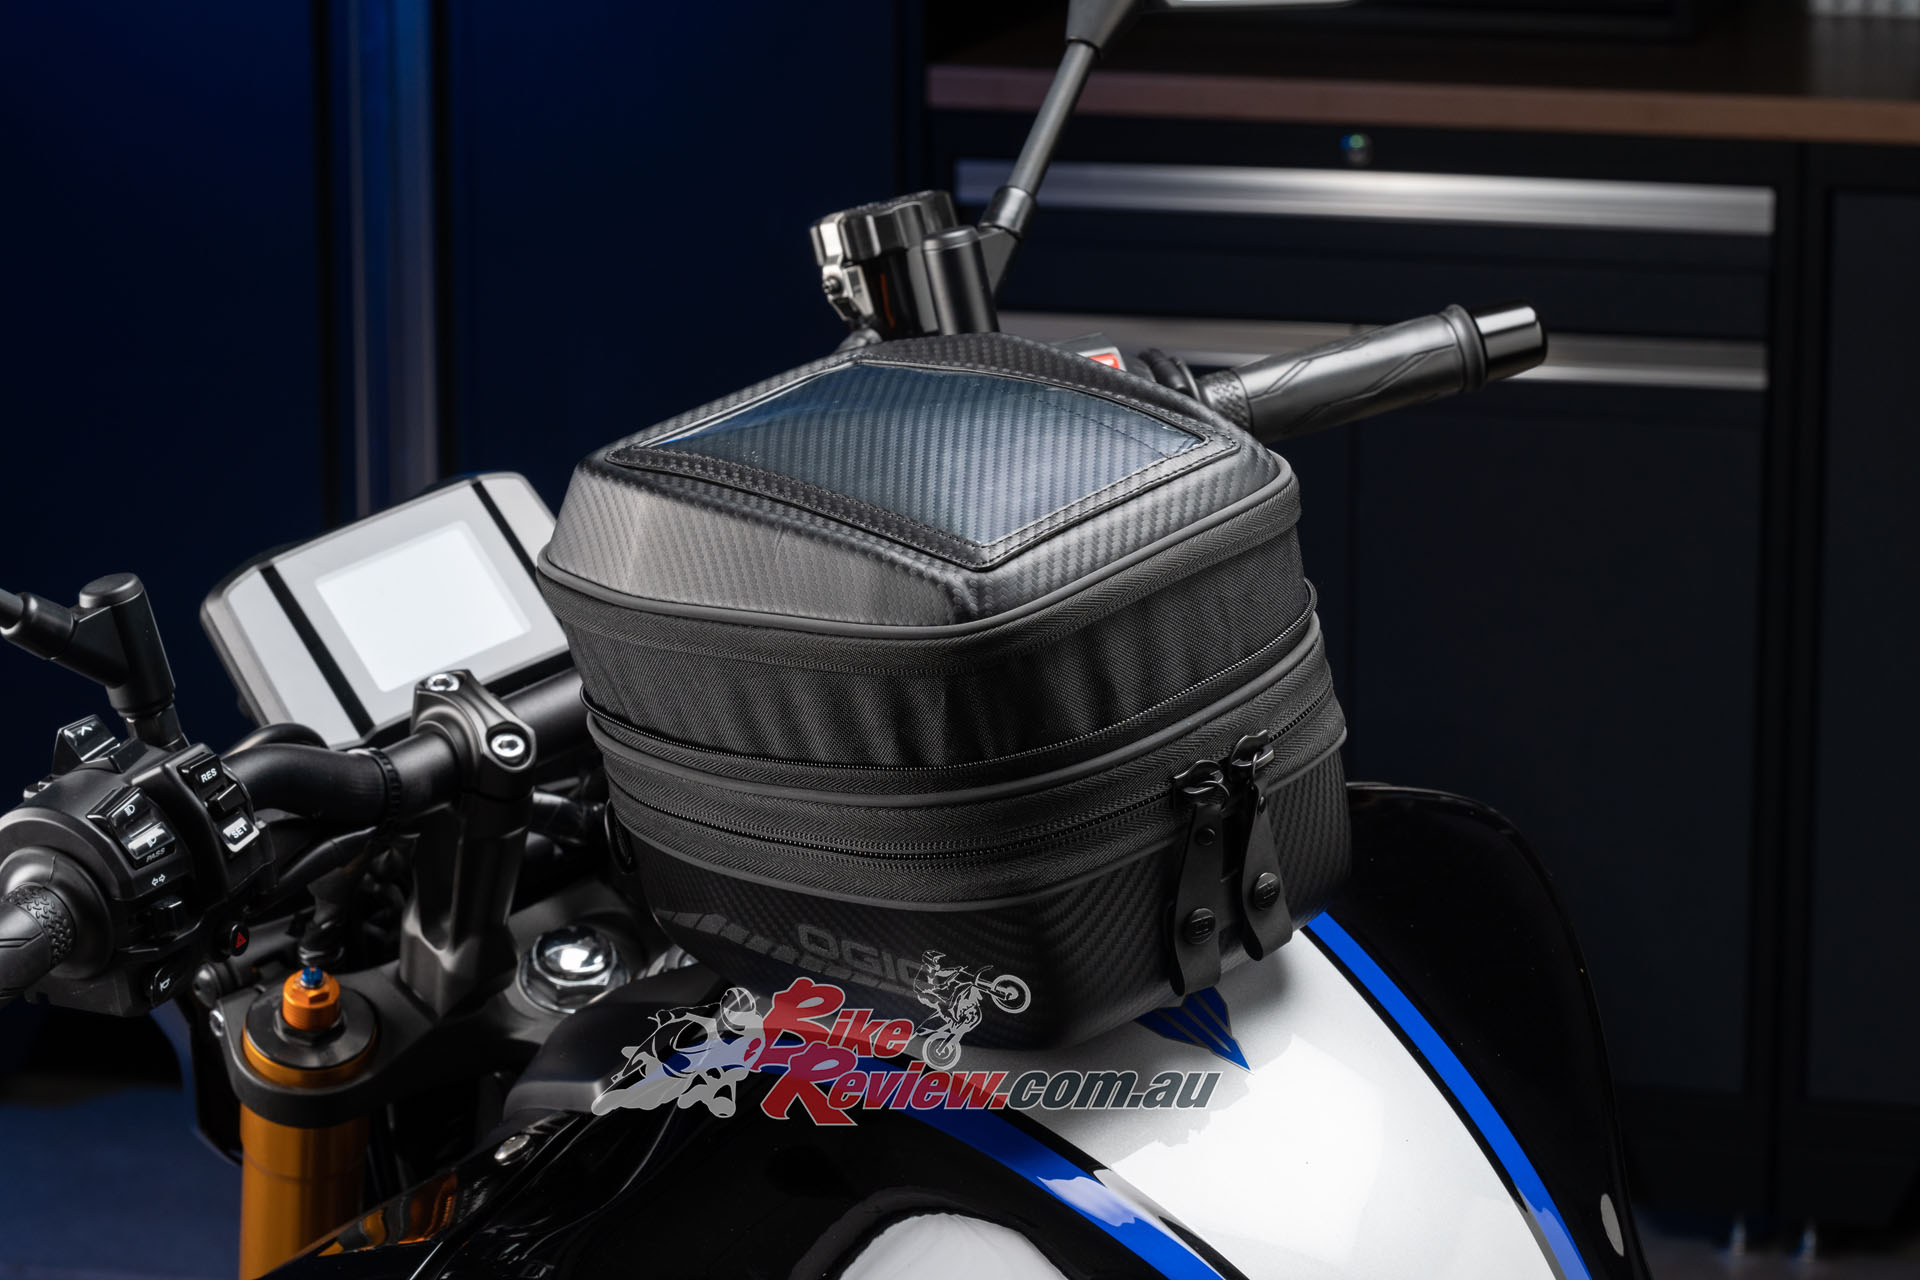 The spacious and carefully designed bags fit perfectly on a range of motorcycles thanks to OGIO's clever RAM MOUNT system.